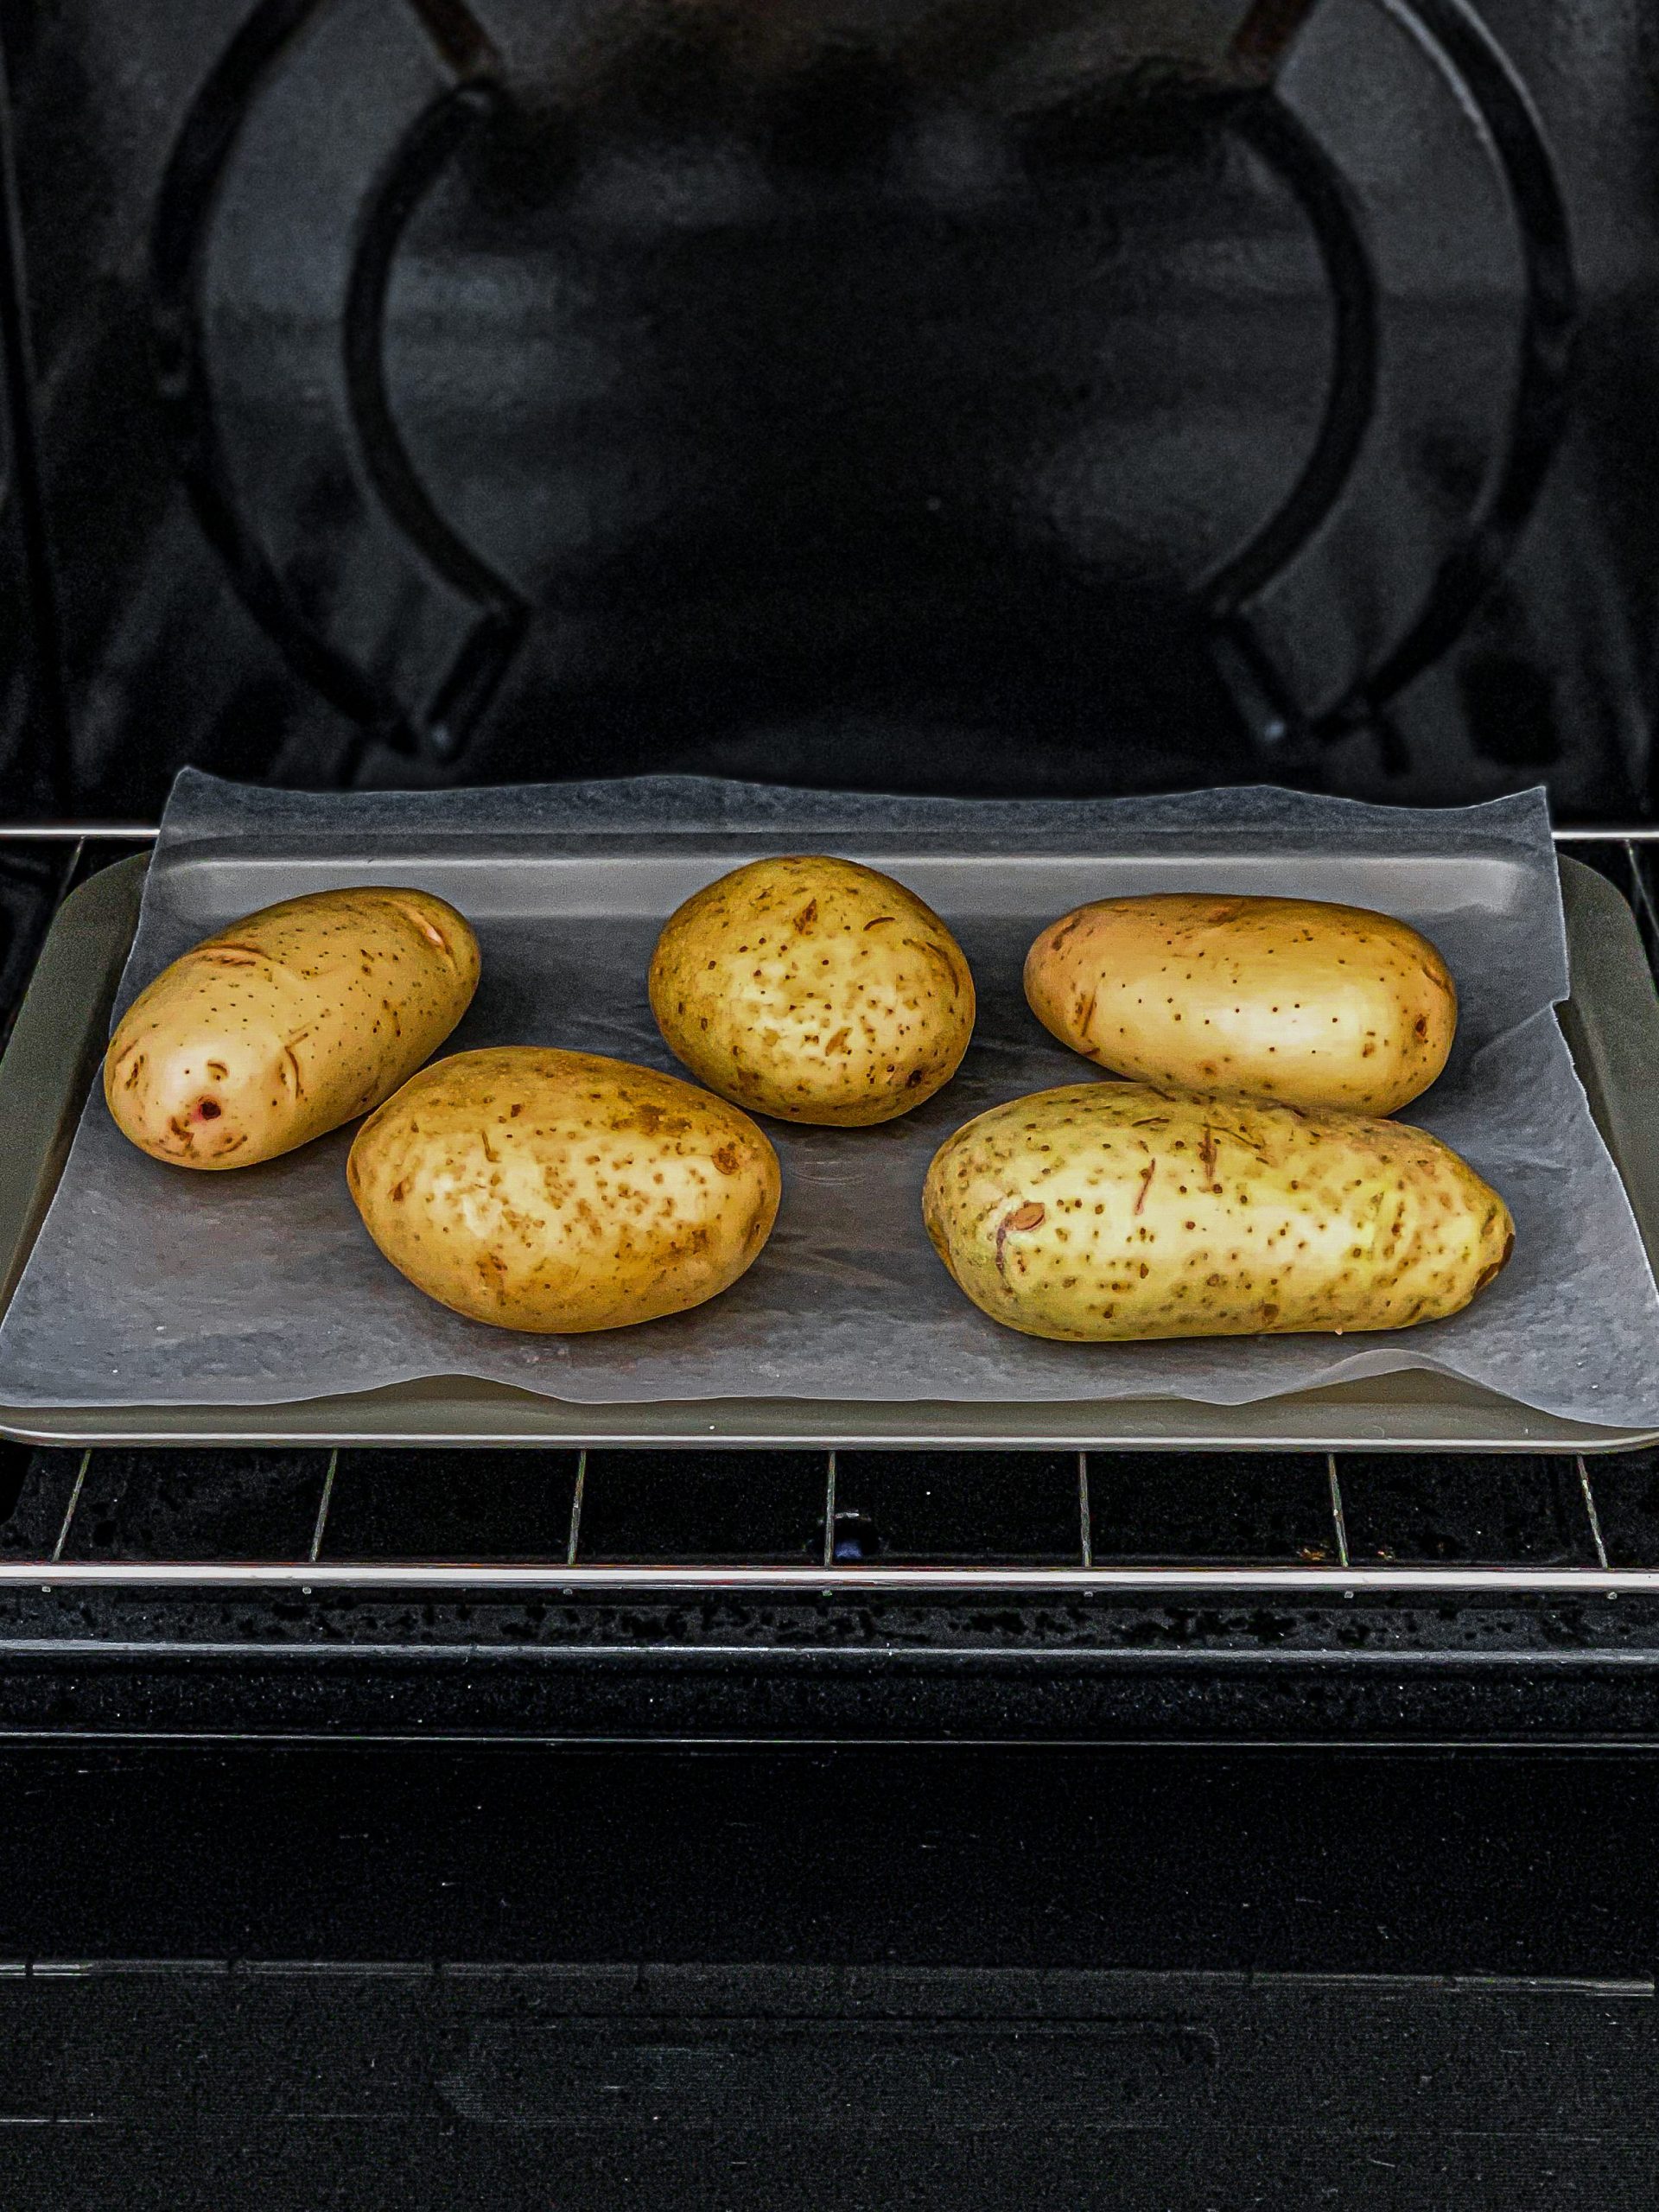 Bake 1 hour and let potatoes cool.